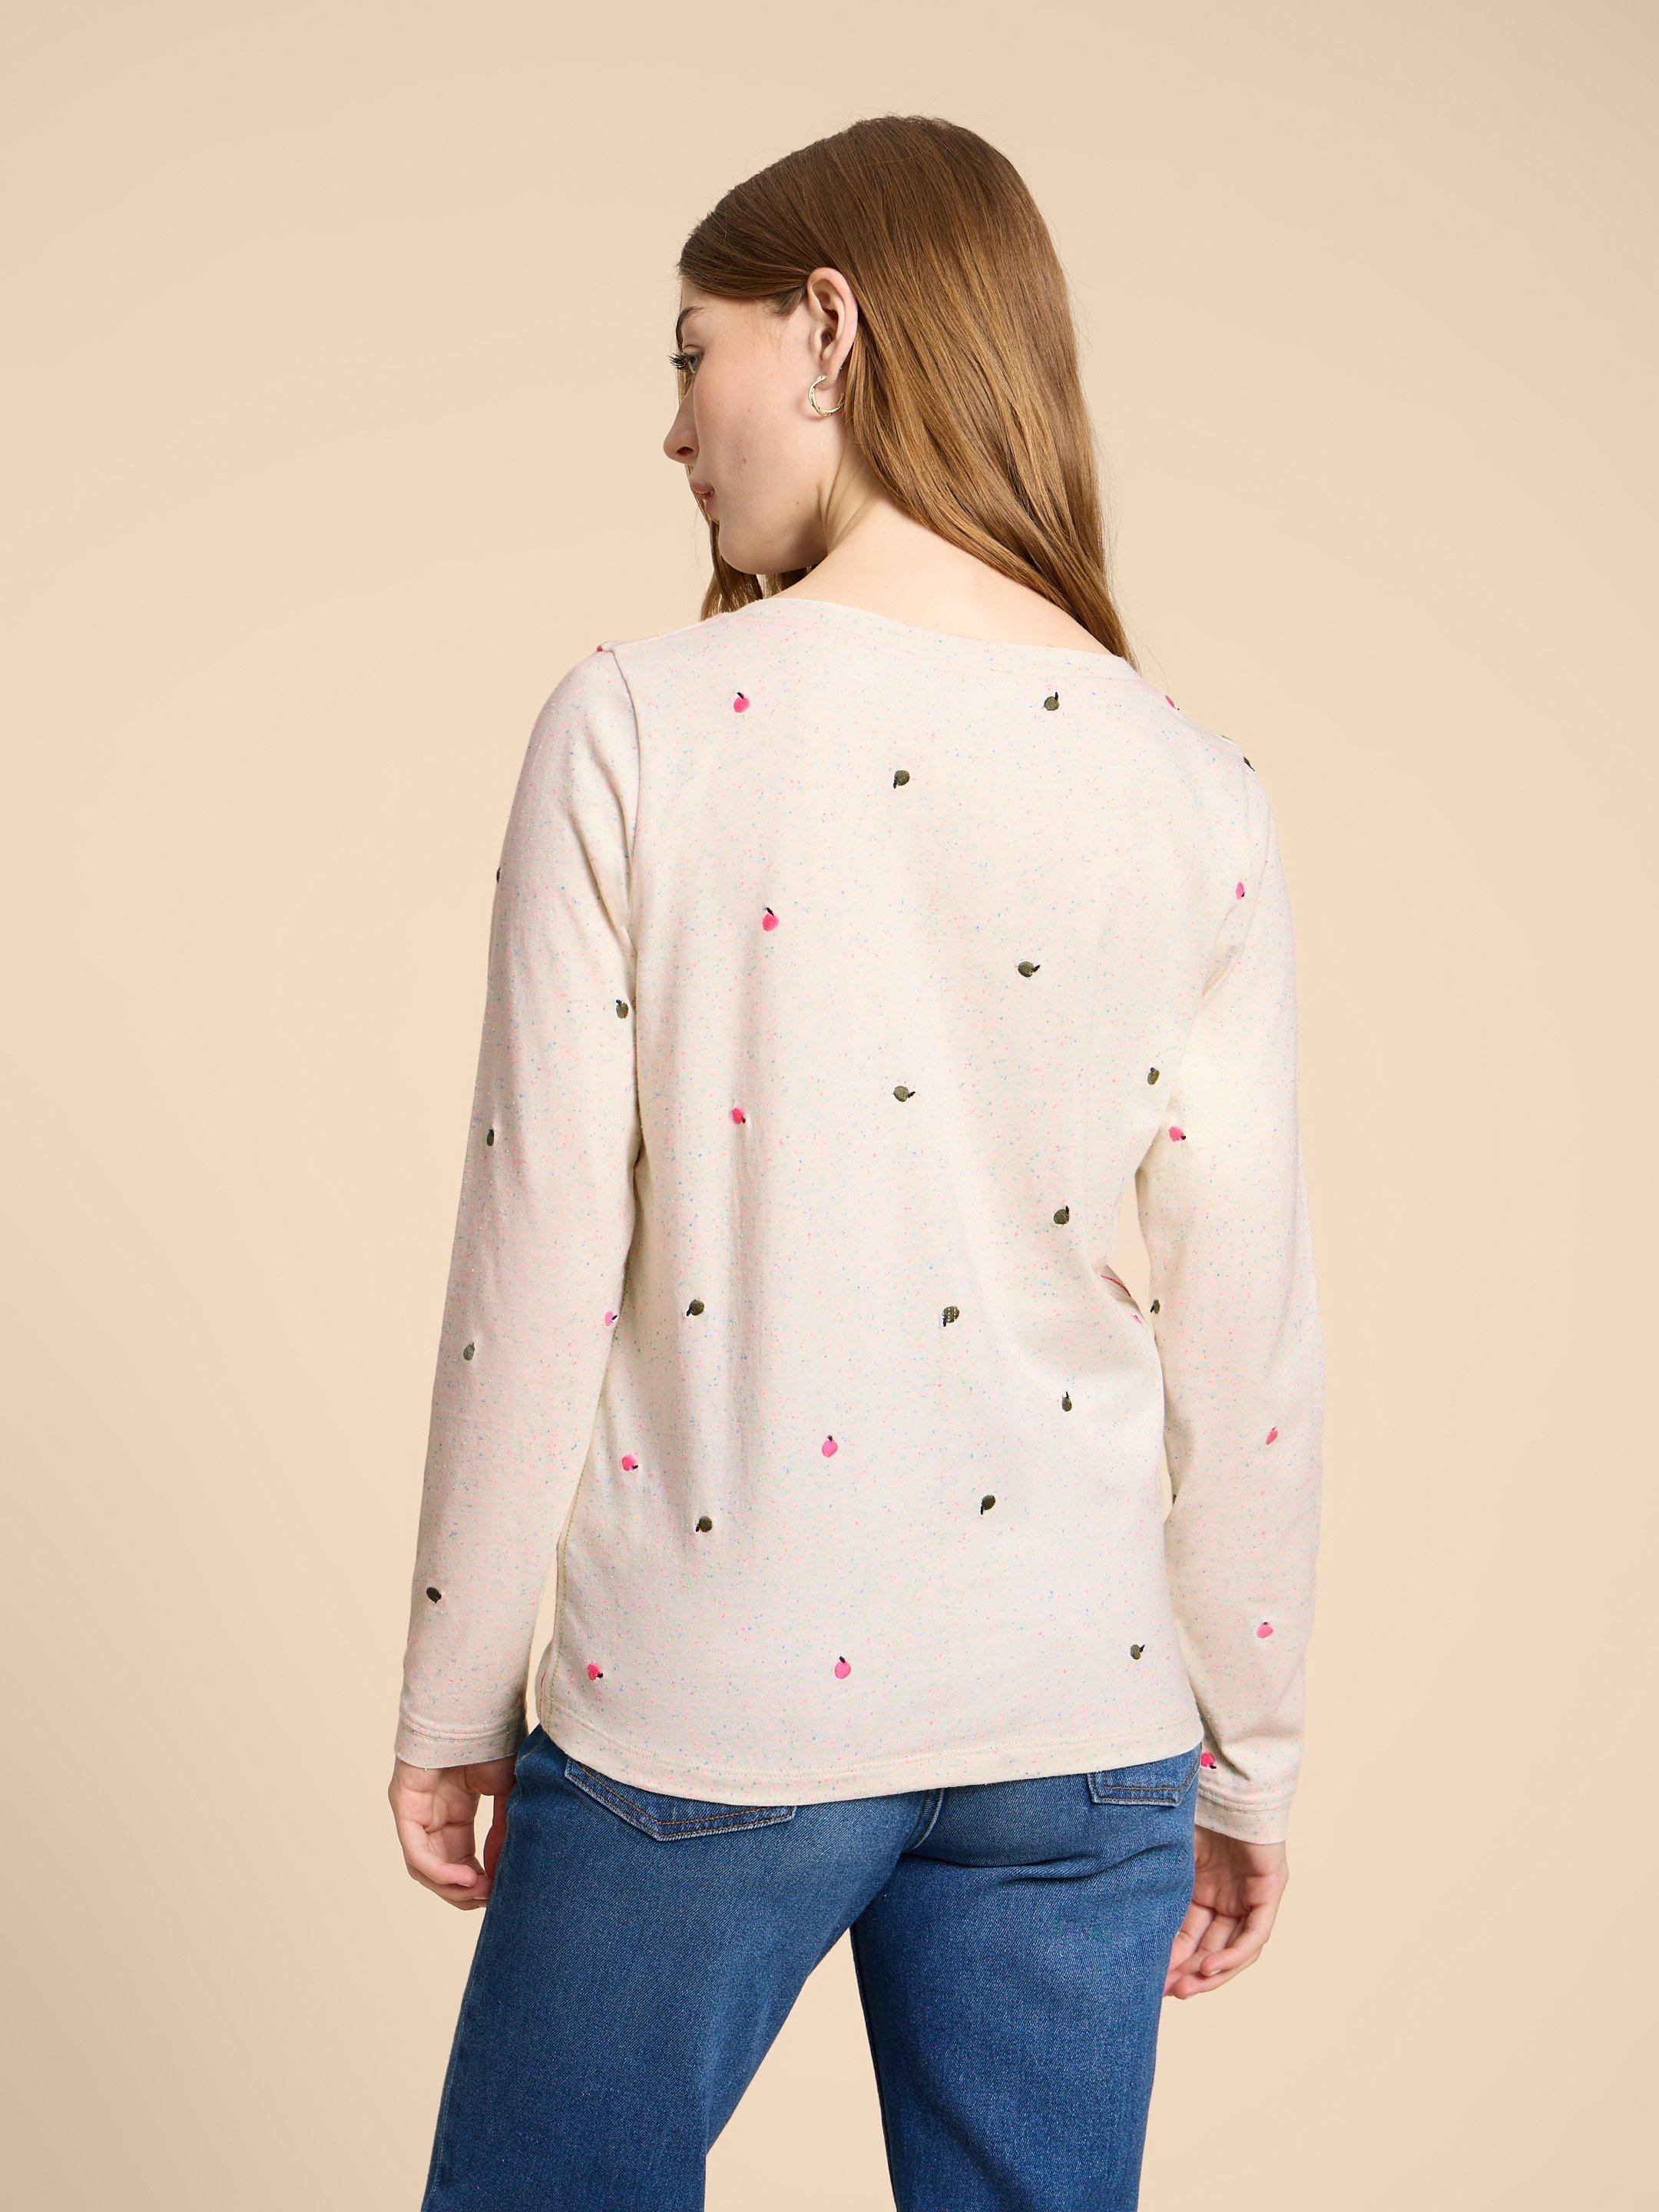 NELLY LS EMBROIDERED TEE in NAT MLT - MODEL BACK